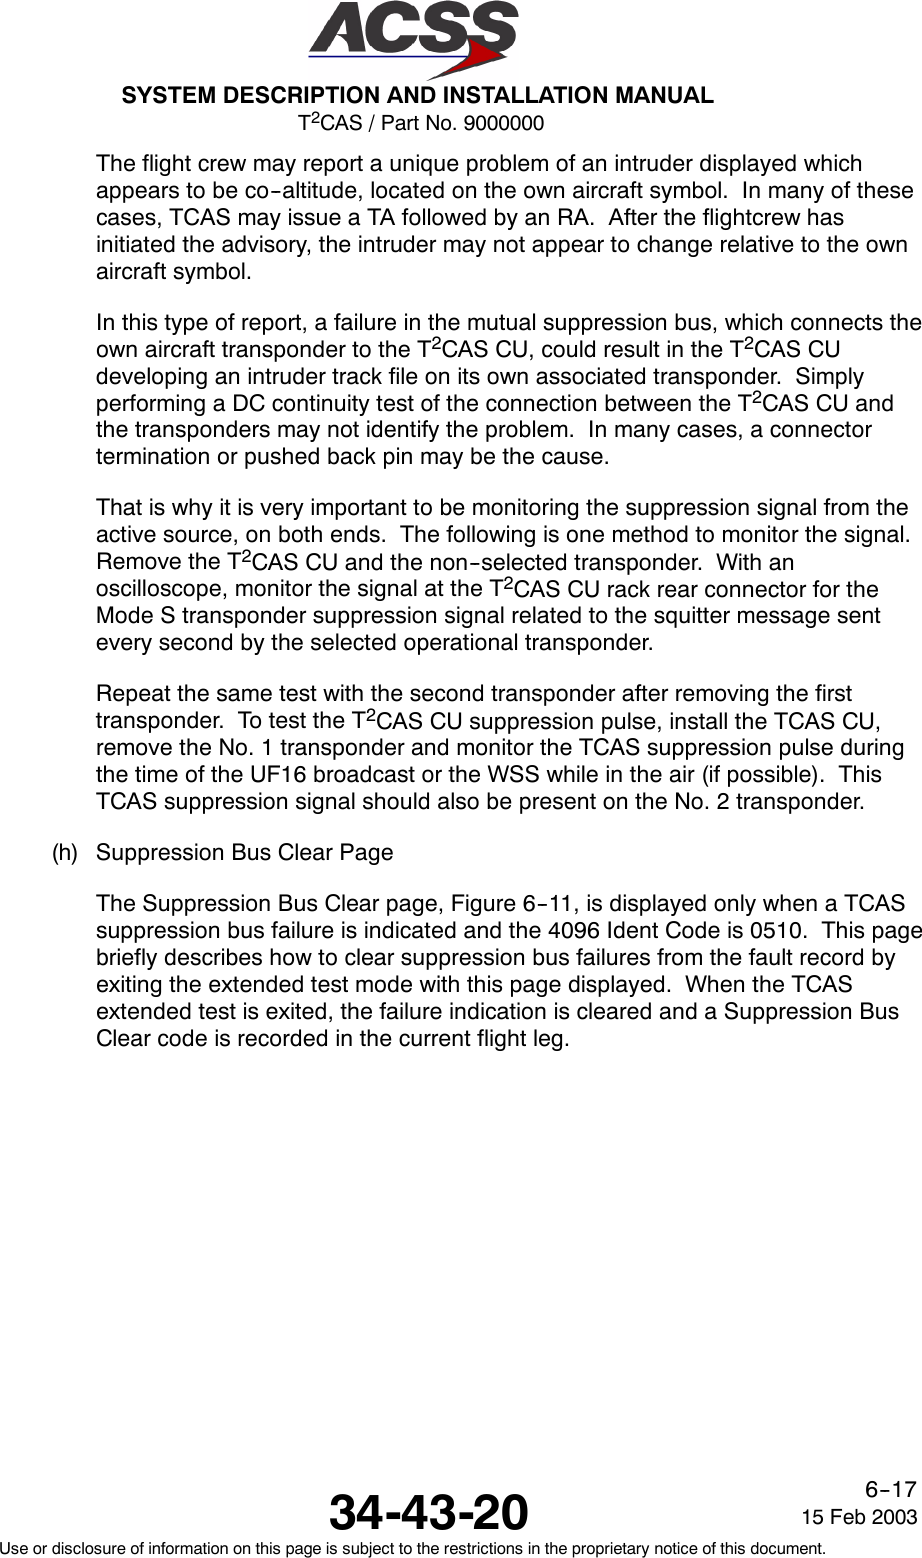 T2CAS / Part No. 9000000SYSTEM DESCRIPTION AND INSTALLATION MANUAL34-43-20 15 Feb 2003Use or disclosure of information on this page is subject to the restrictions in the proprietary notice of this document.6--17The flight crew may report a unique problem of an intruder displayed whichappears to be co--altitude, located on the own aircraft symbol. In many of thesecases, TCAS may issue a TA followed by an RA. After the flightcrew hasinitiated the advisory, the intruder may not appear to change relative to the ownaircraft symbol.In this type of report, a failure in the mutual suppression bus, which connects theown aircraft transponder to the T2CAS CU, could result in the T2CAS CUdeveloping an intruder track file on its own associated transponder. Simplyperforming a DC continuity test of the connection between the T2CAS CU andthe transponders may not identify the problem. In many cases, a connectortermination or pushed back pin may be the cause.That is why it is very important to be monitoring the suppression signal from theactive source, on both ends. The following is one method to monitor the signal.Remove the T2CAS CU and the non--selected transponder. With anoscilloscope, monitor the signal at the T2CAS CU rack rear connector for theMode S transponder suppression signal related to the squitter message sentevery second by the selected operational transponder.Repeat the same test with the second transponder after removing the firsttransponder. To test the T2CAS CU suppression pulse, install the TCAS CU,remove the No. 1 transponder and monitor the TCAS suppression pulse duringthe time of the UF16 broadcast or the WSS while in the air (if possible). ThisTCAS suppression signal should also be present on the No. 2 transponder.(h) Suppression Bus Clear PageThe Suppression Bus Clear page, Figure 6--11, is displayed only when a TCASsuppression bus failure is indicated and the 4096 Ident Code is 0510. This pagebriefly describes how to clear suppression bus failures from the fault record byexiting the extended test mode with this page displayed. When the TCASextended test is exited, the failure indication is cleared and a Suppression BusClear code is recorded in the current flight leg.